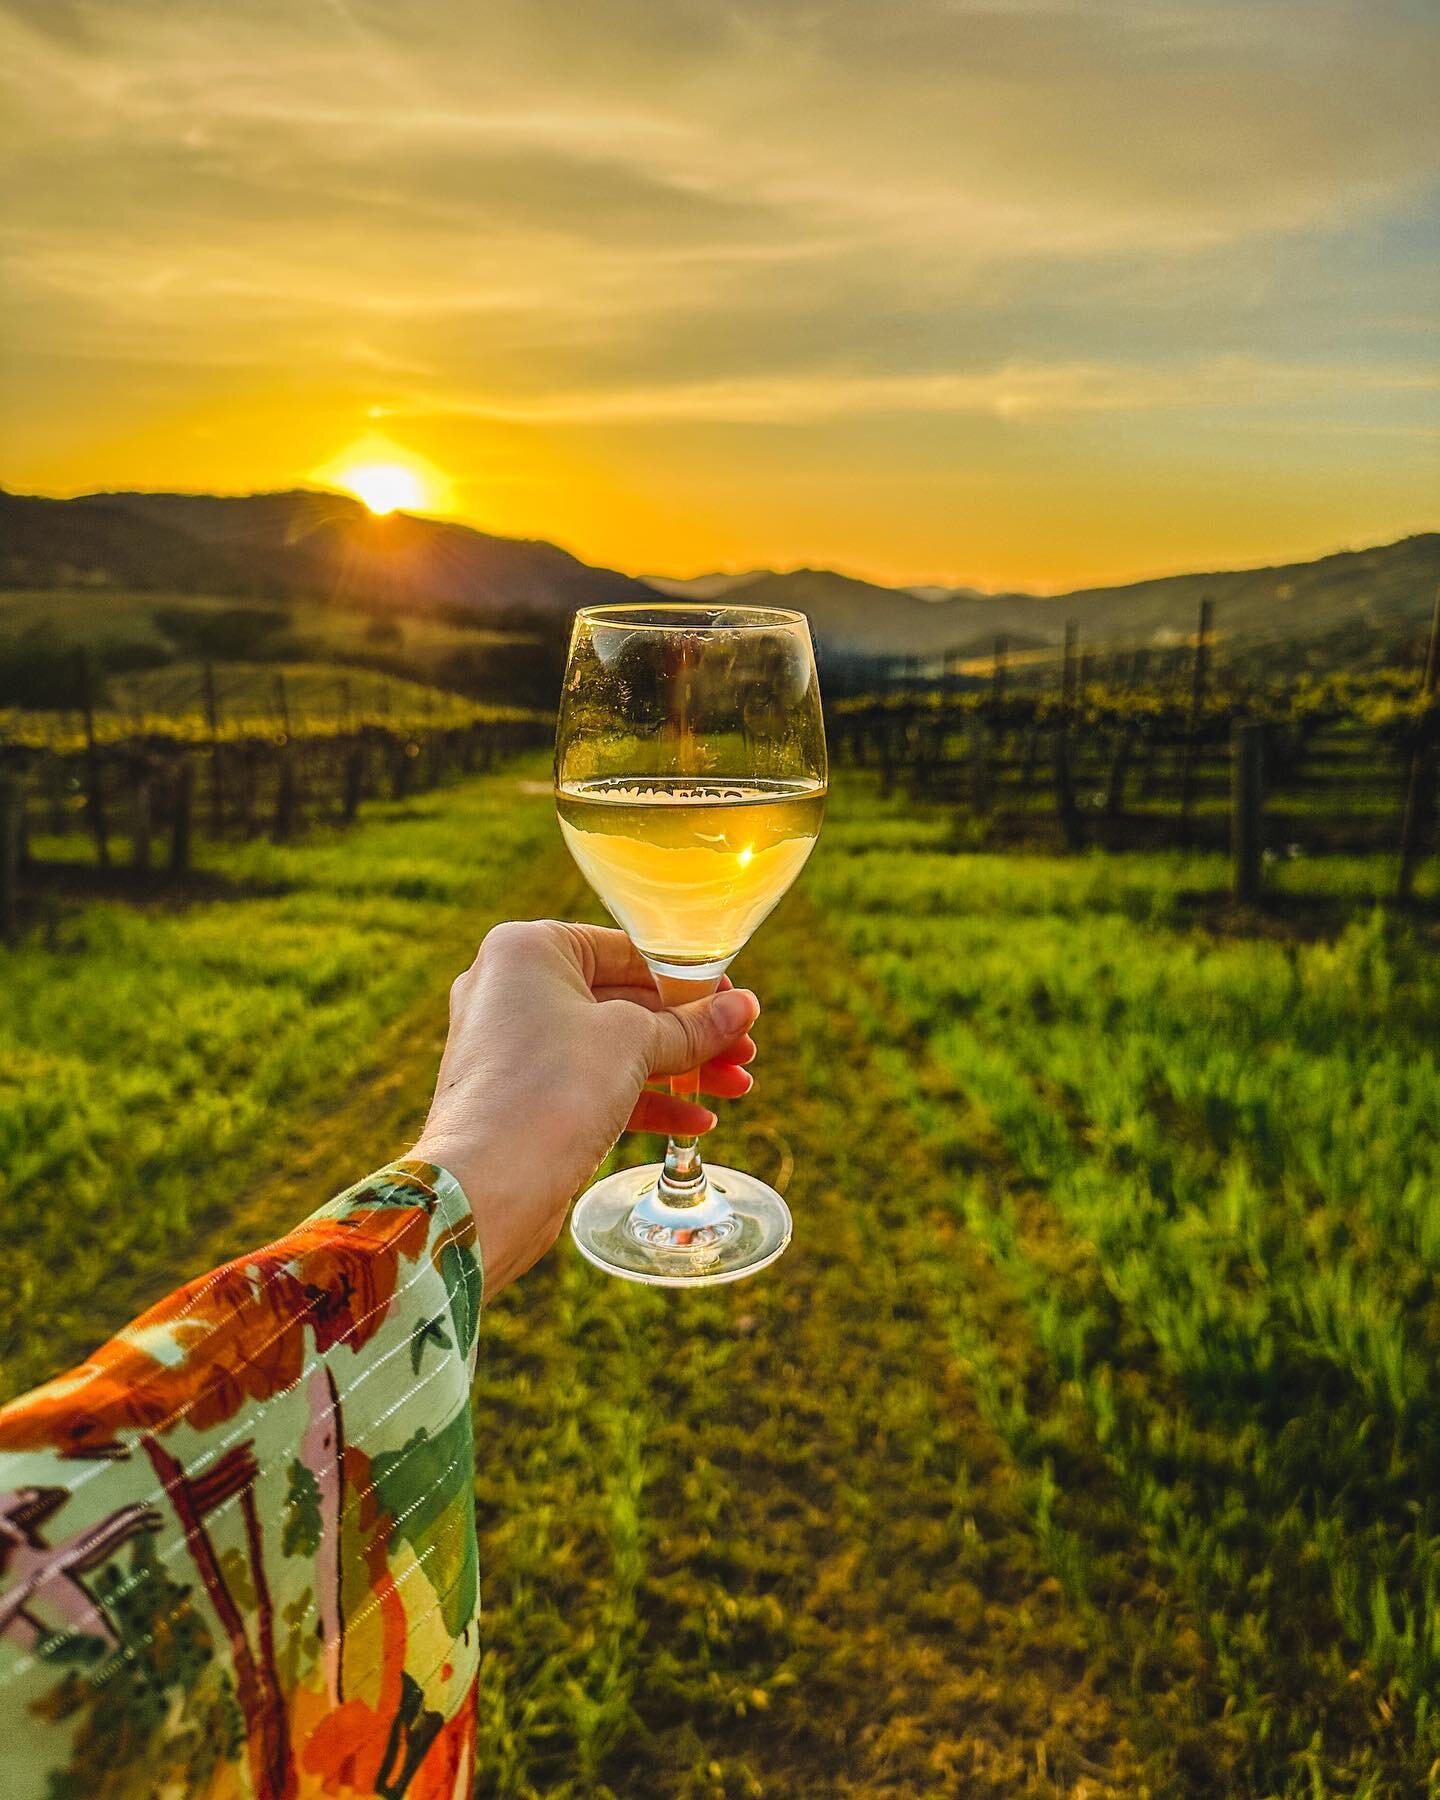 Cheers to wine country! 🥂

We&rsquo;ve been to many vineyards in Napa over the years, but this was our first time experiencing vineyards in Carmel Valley. 

The entire village is dedicated to experiencing all the wine the region has to offer, and th